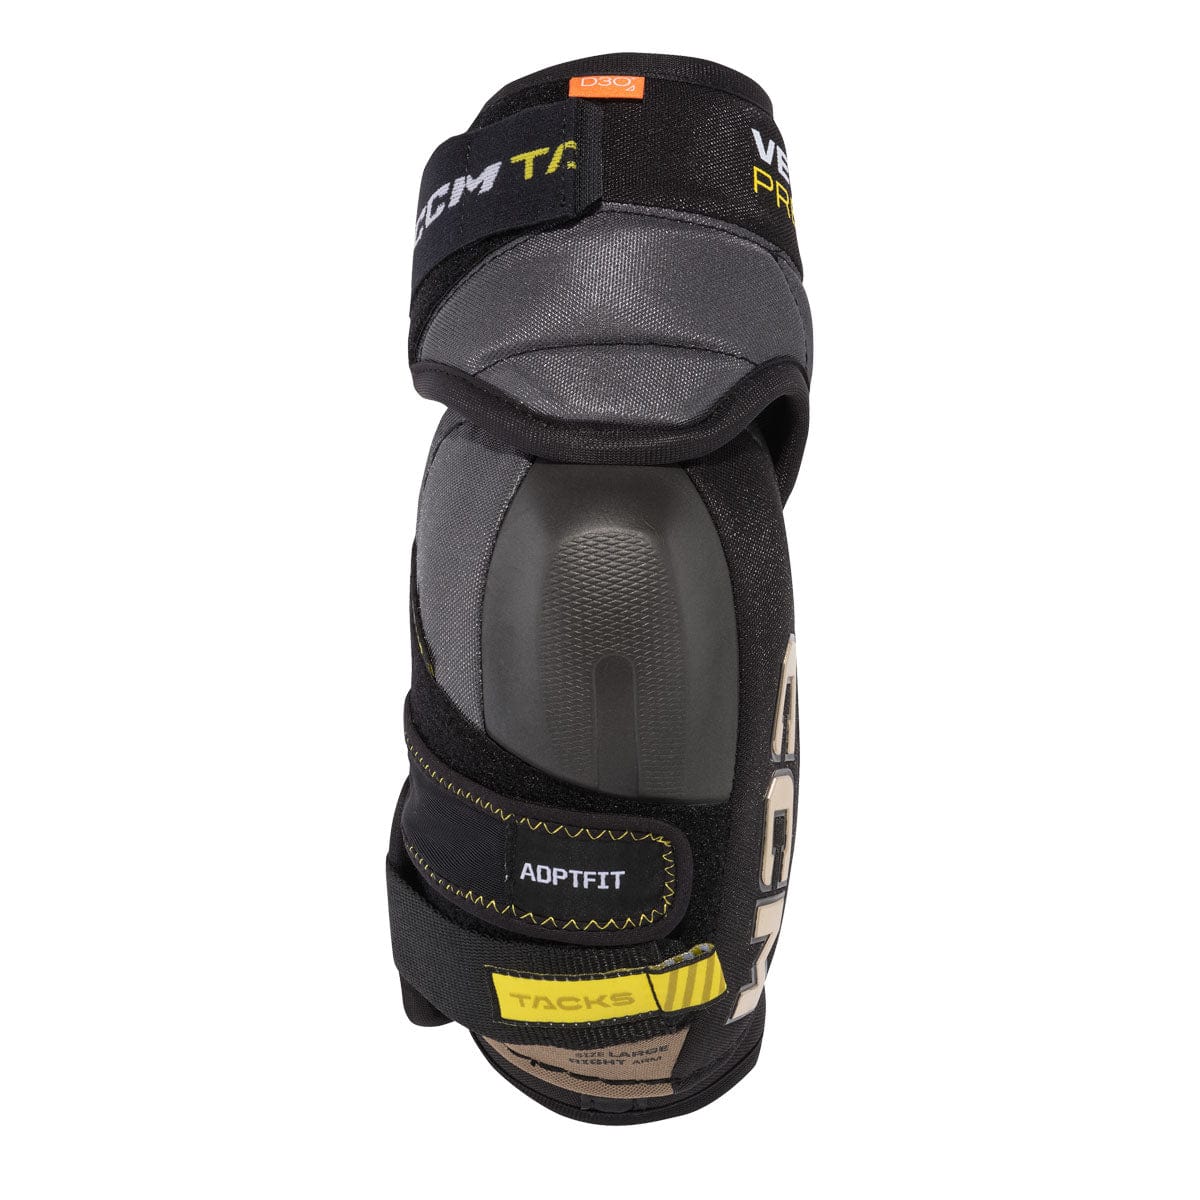 CCM Tacks Vector Premier Junior Hockey Elbow Pads - The Hockey Shop Source For Sports